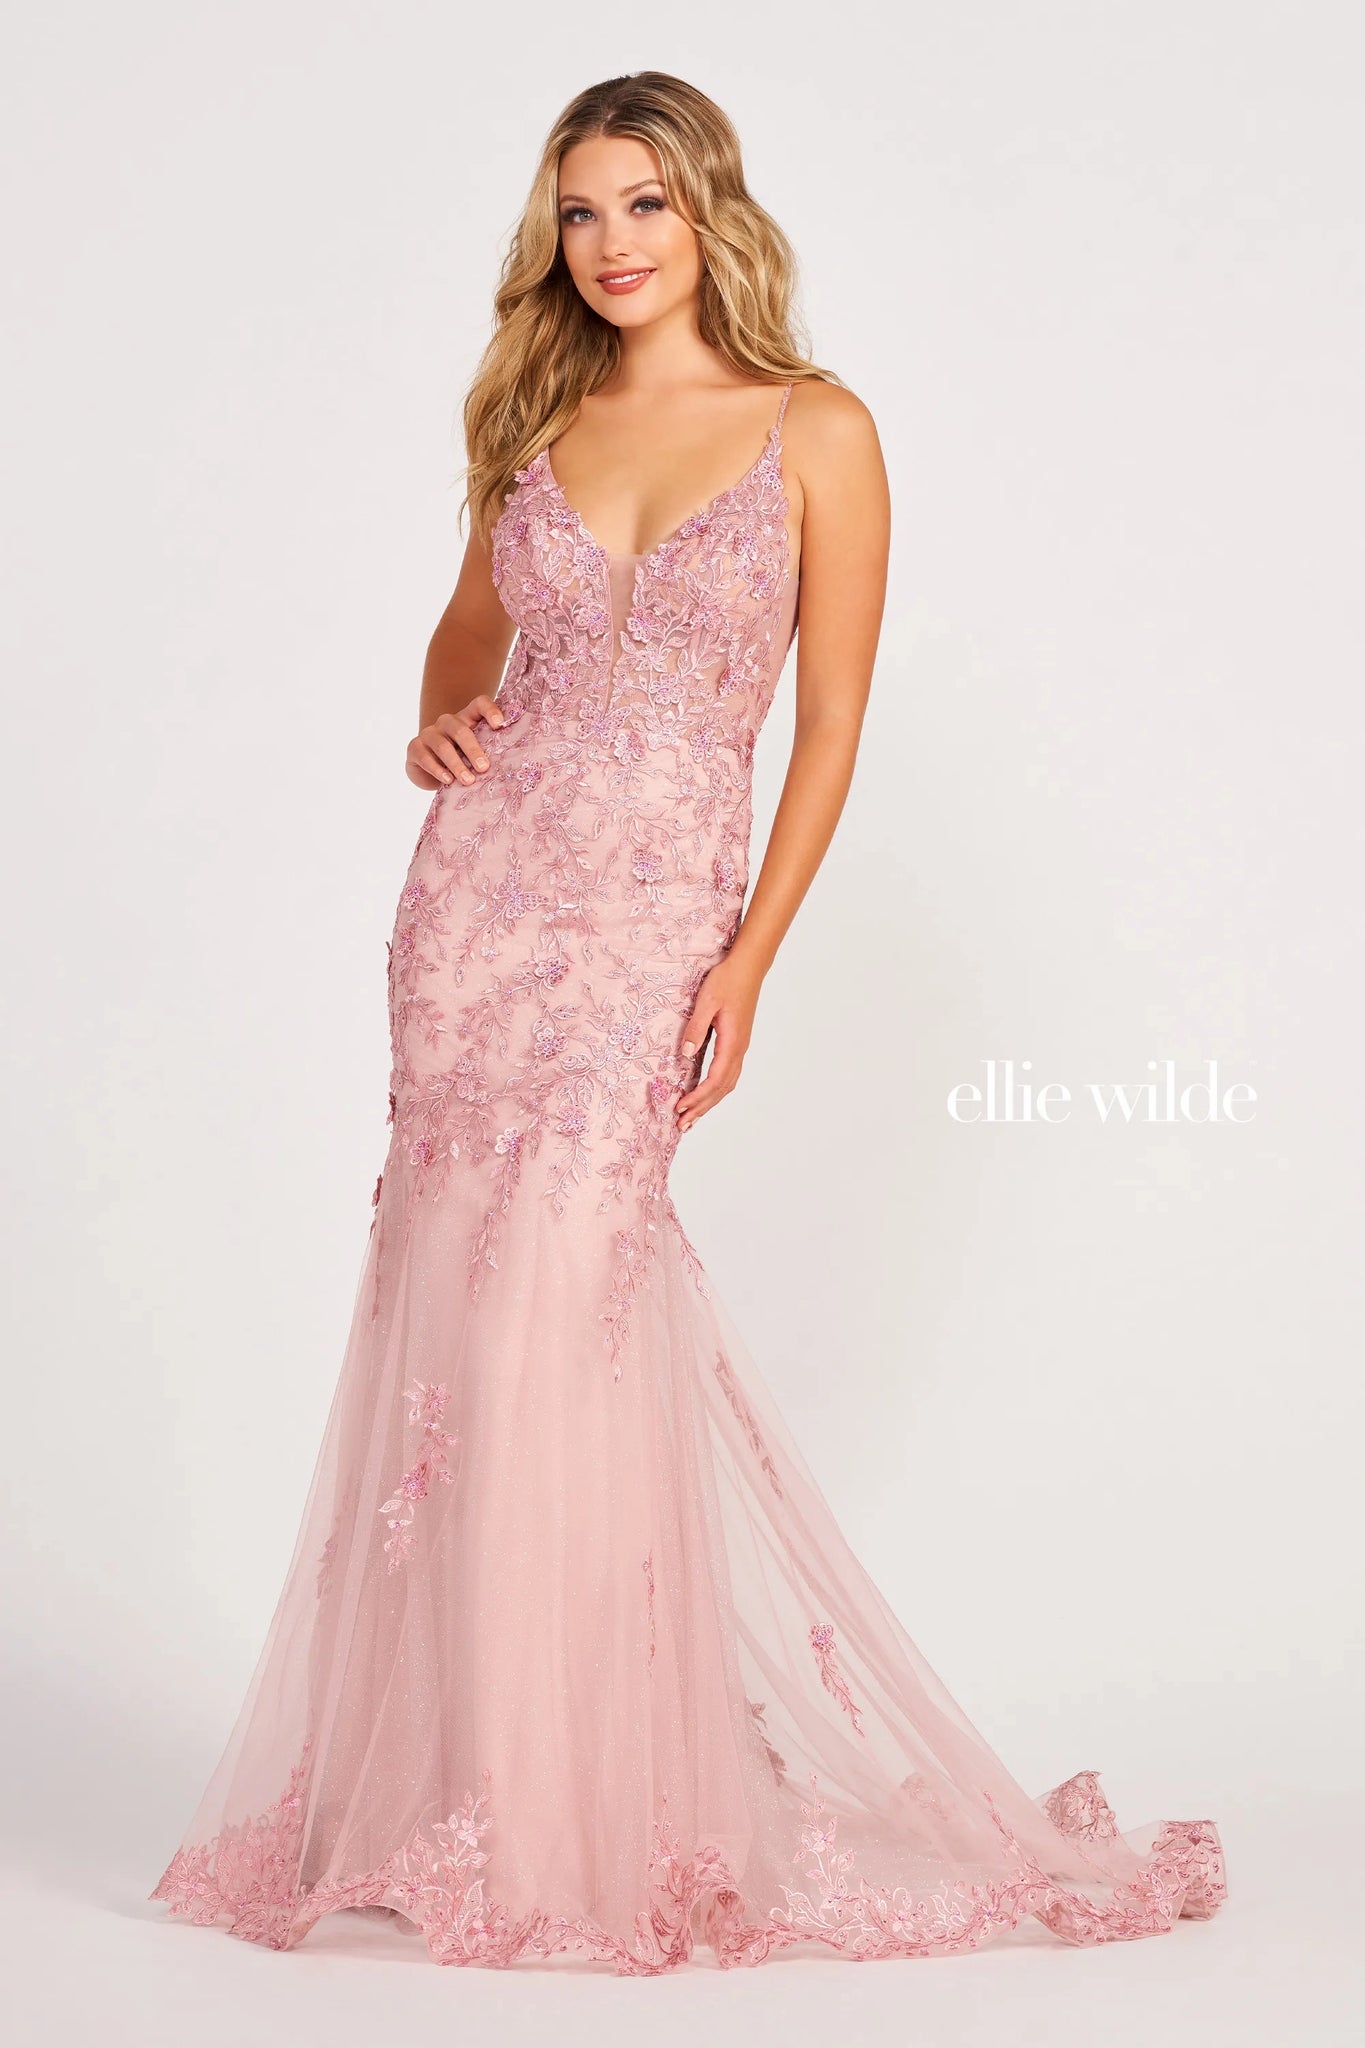 Embrace your celestial charm in this heavenly dress by Ellie Wilde. Designed with a mermaid silhouette, the dress is designed with a faux plunging neckline and a sheer corset bodice. The dress is embellished with beautiful flower appliques and gives the most heavenly elegance.